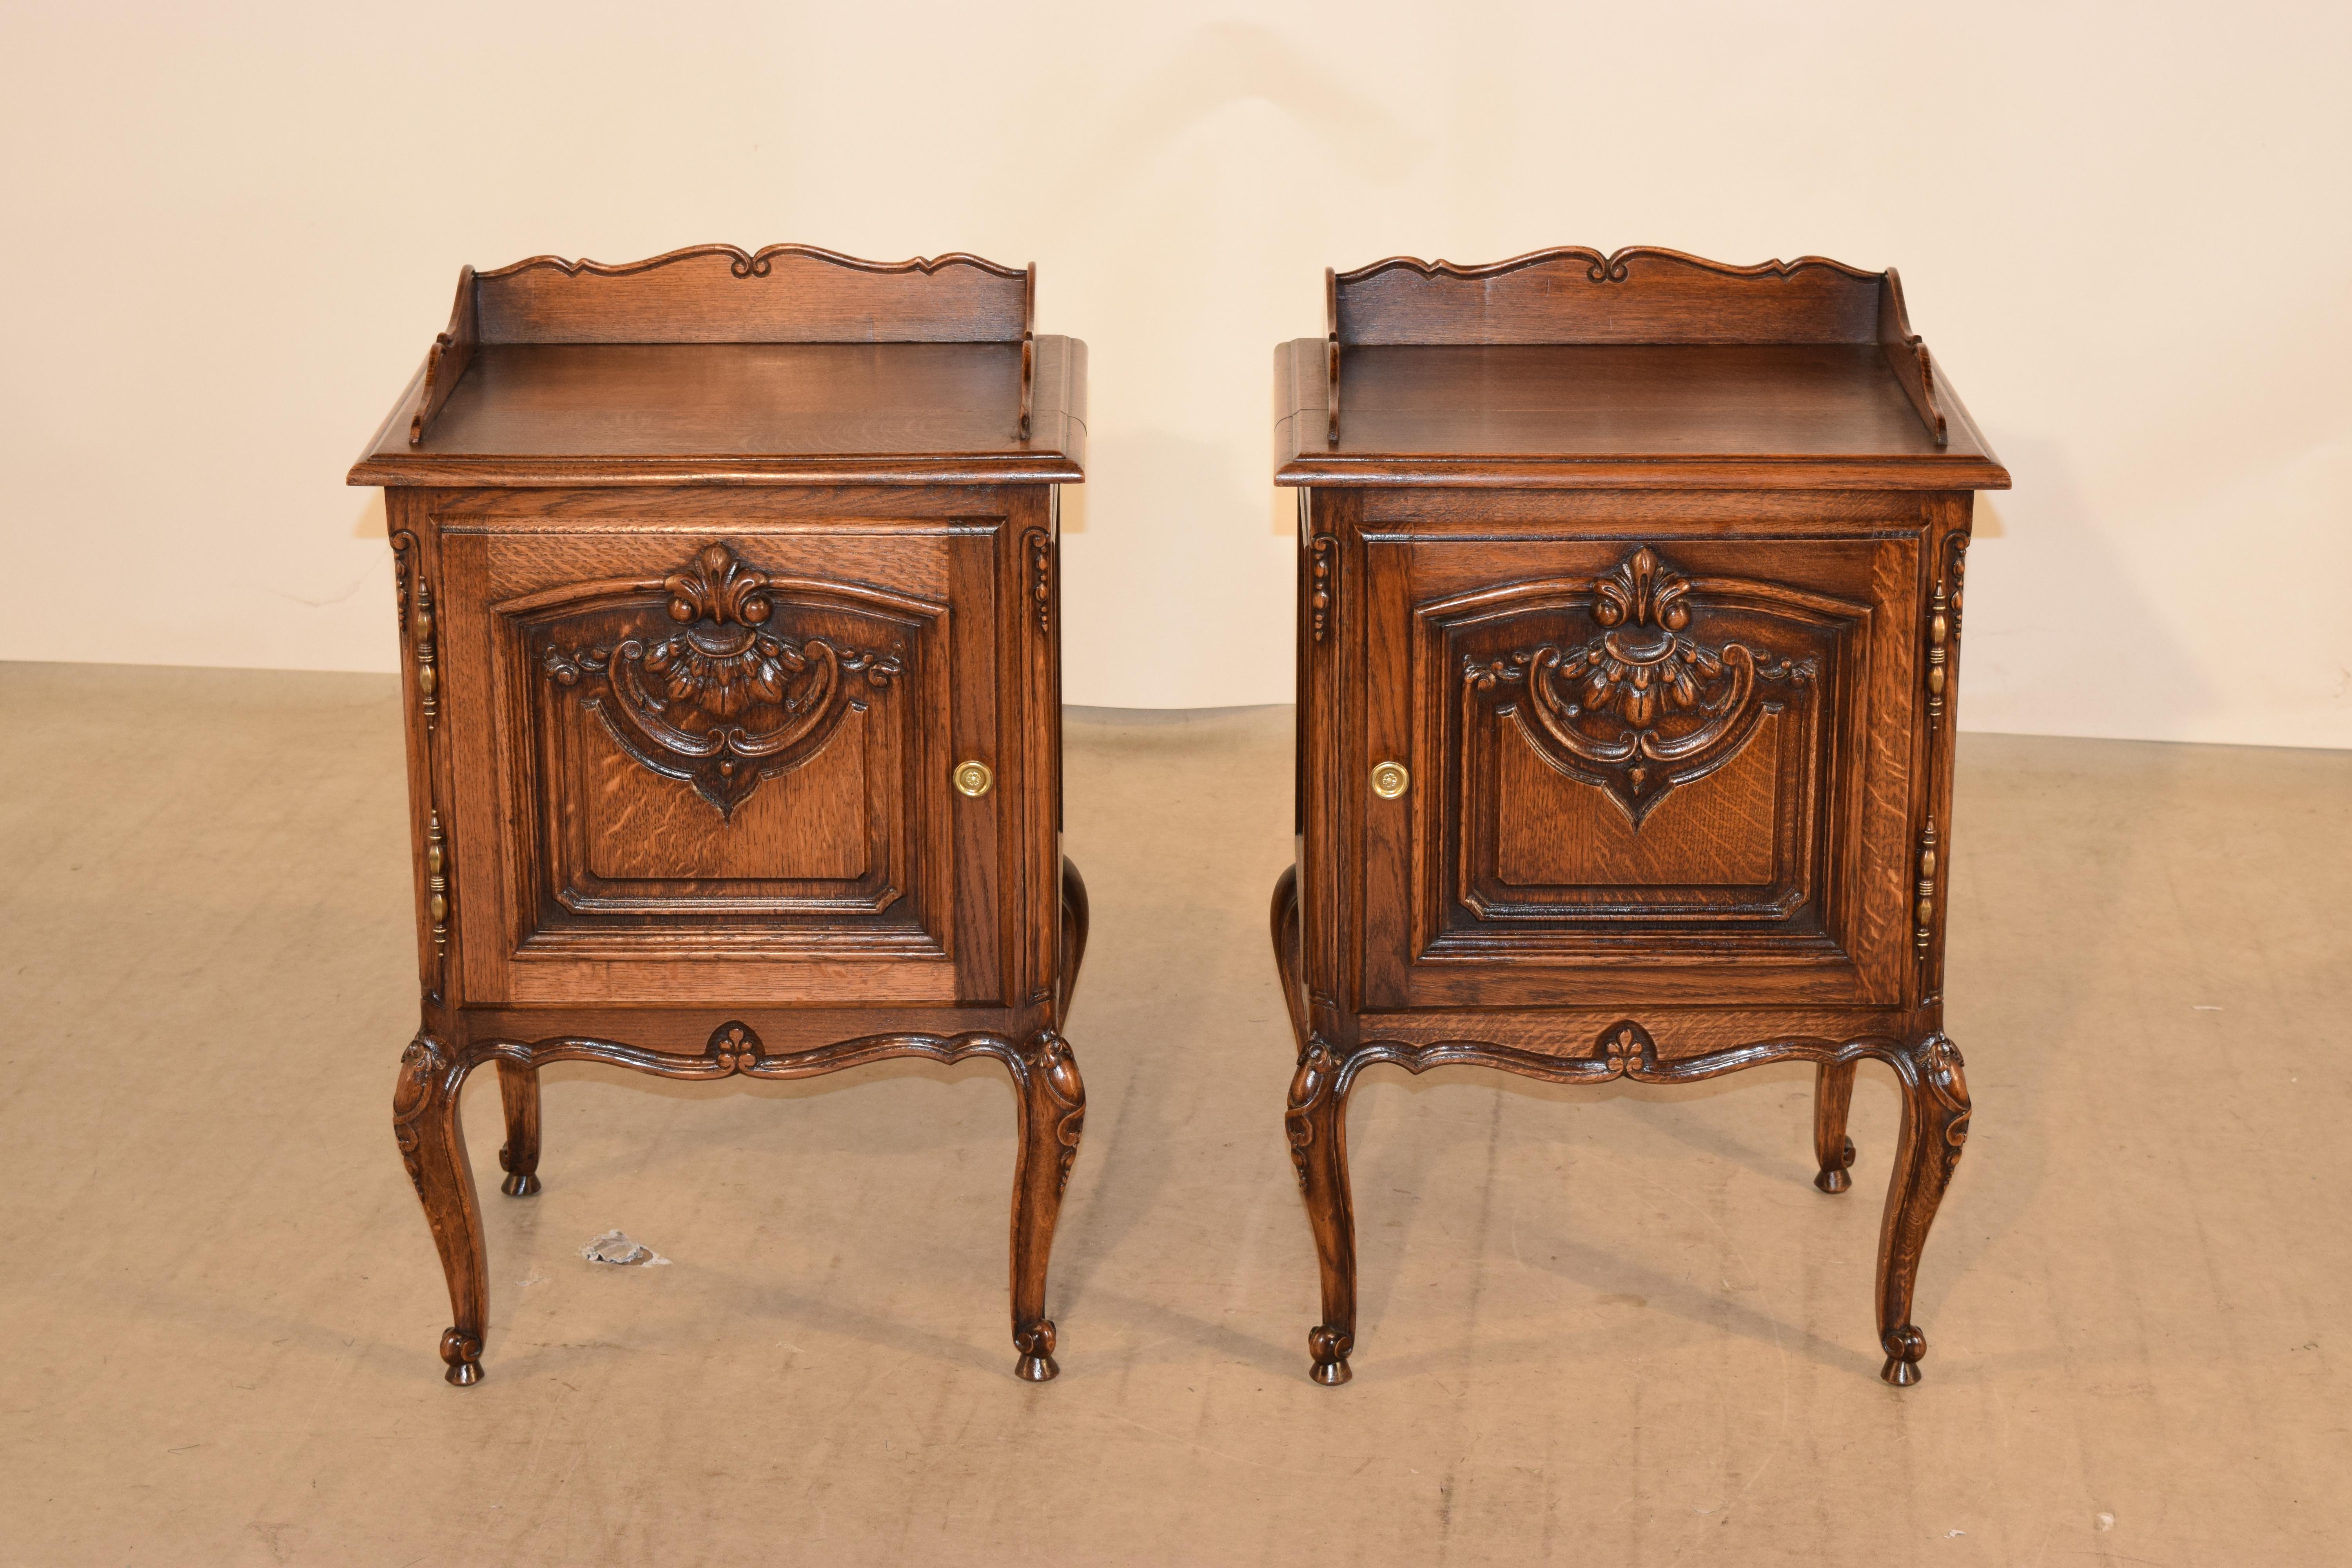 Early 20th Century Pair of French Oak Bedsides, circa 1900